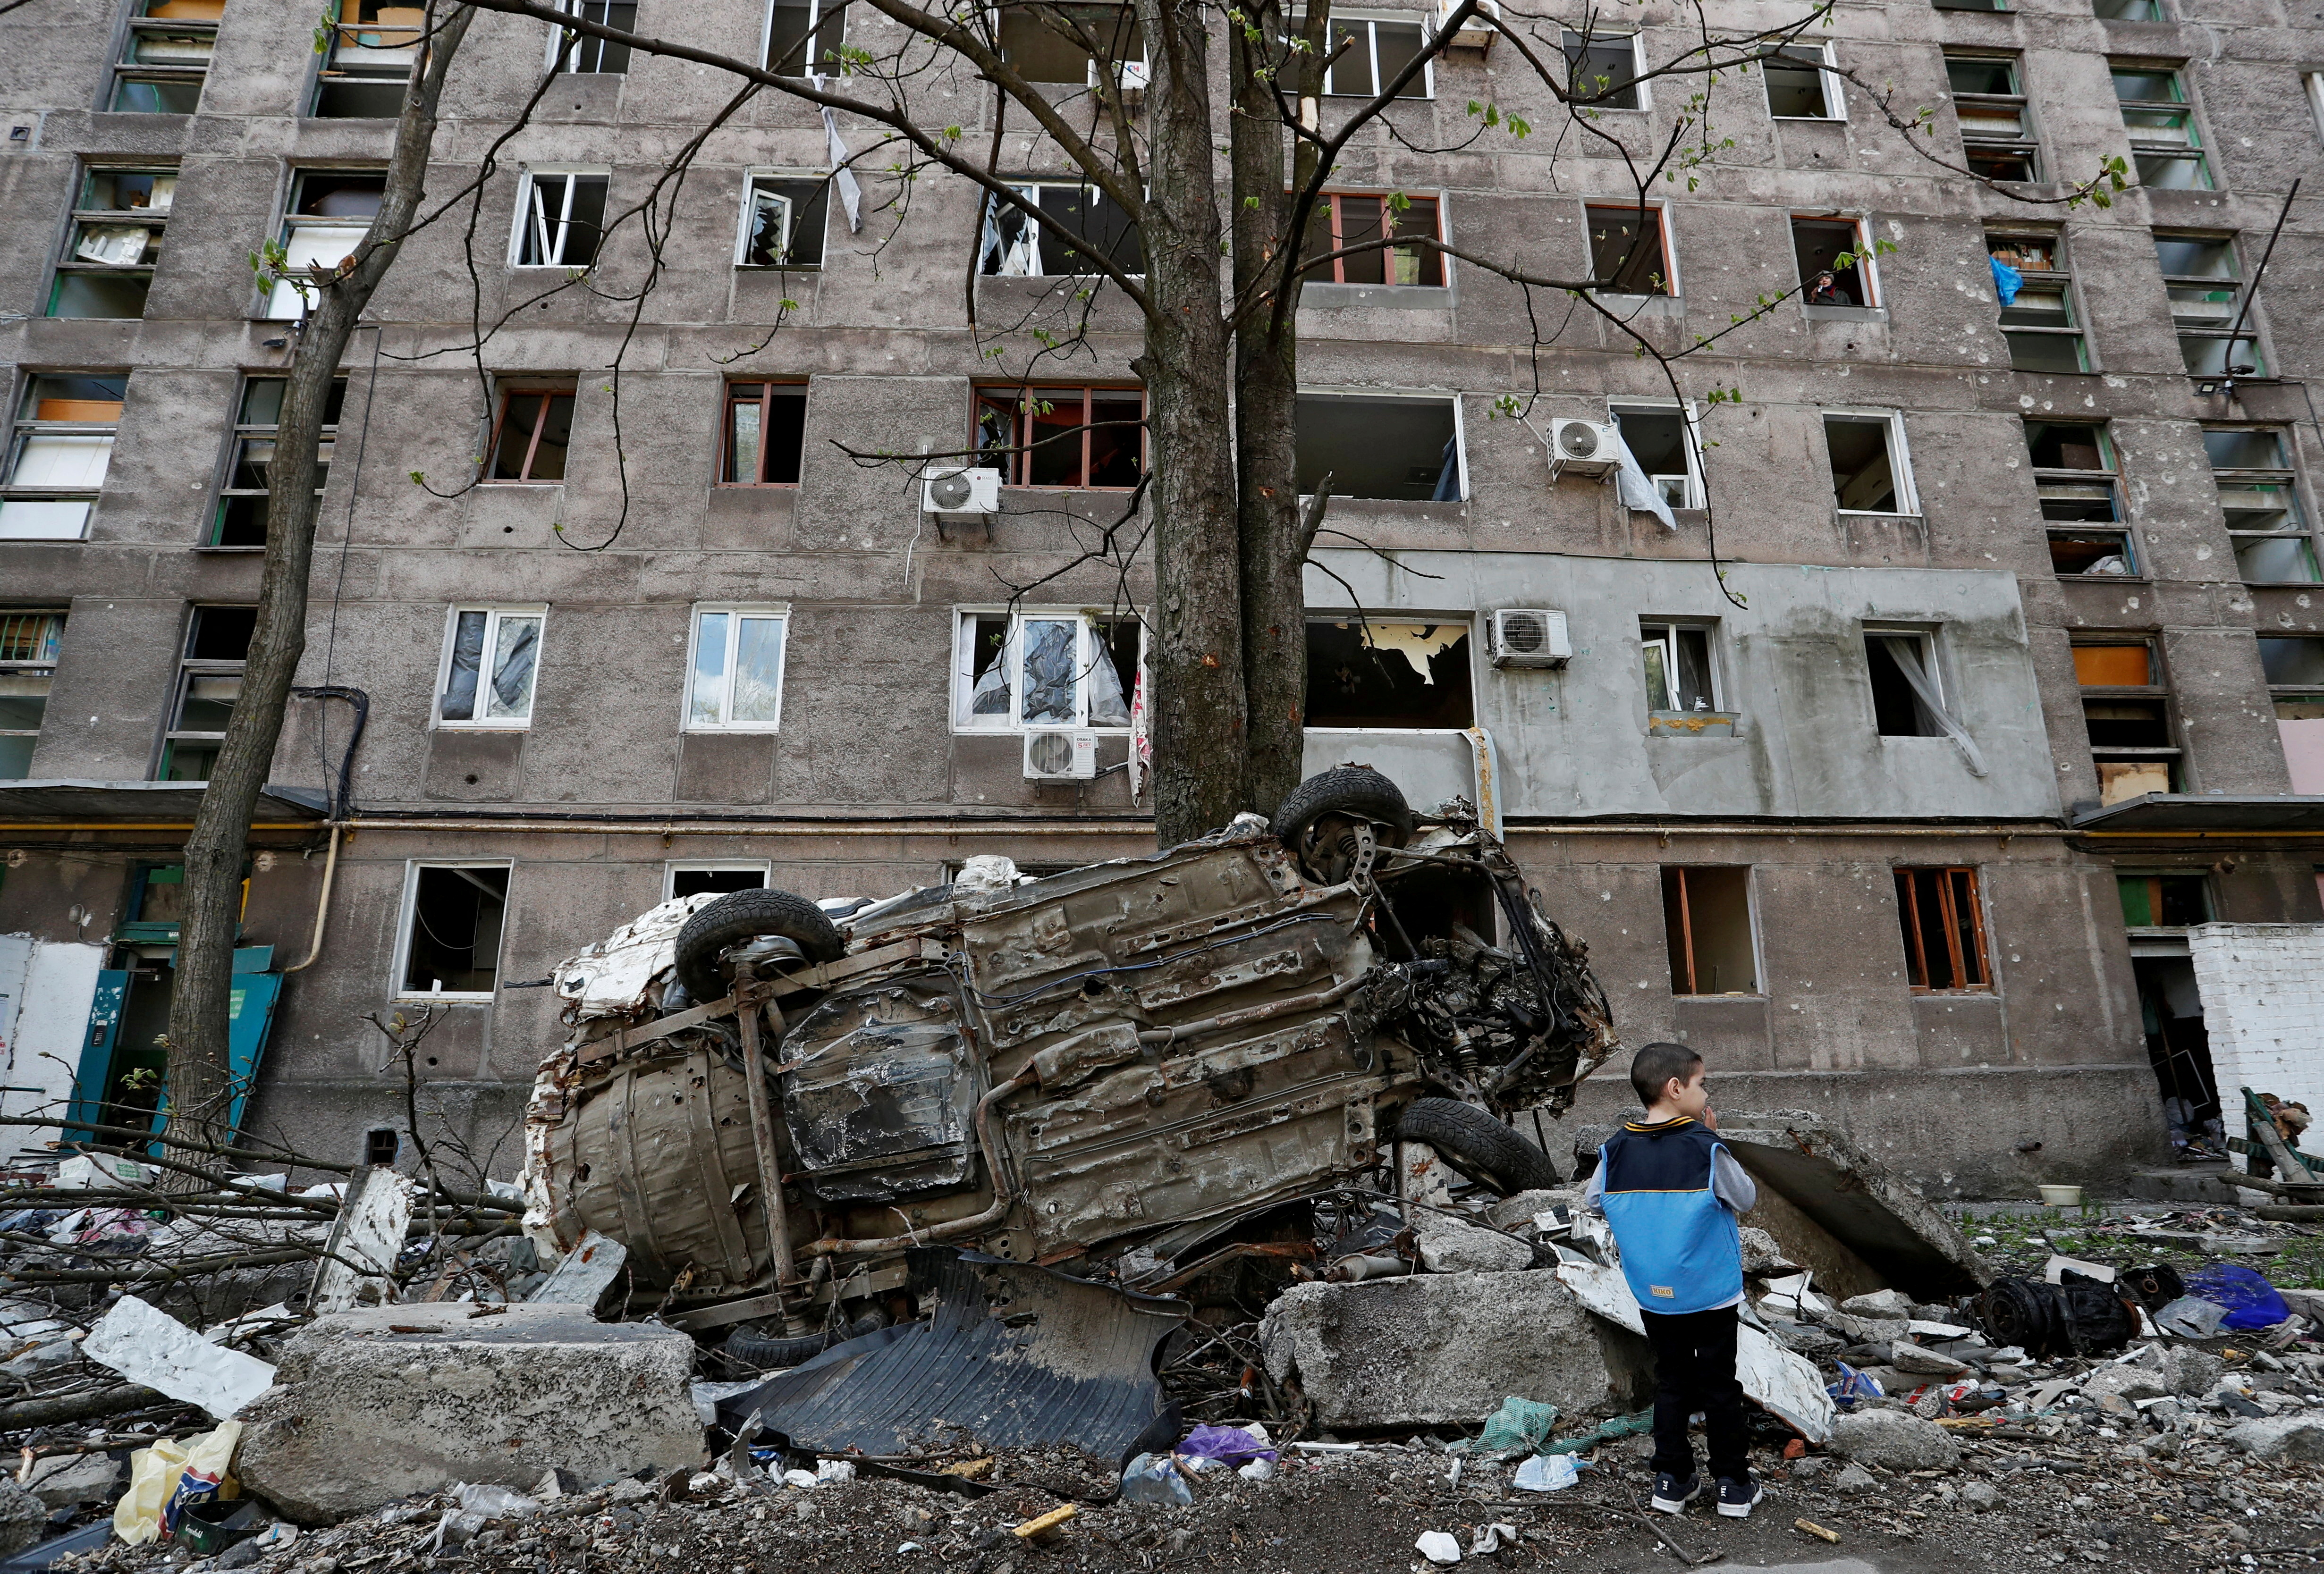 A boy stands next to a wrecked vehicle in front of a damaged apartment building in Mariupol